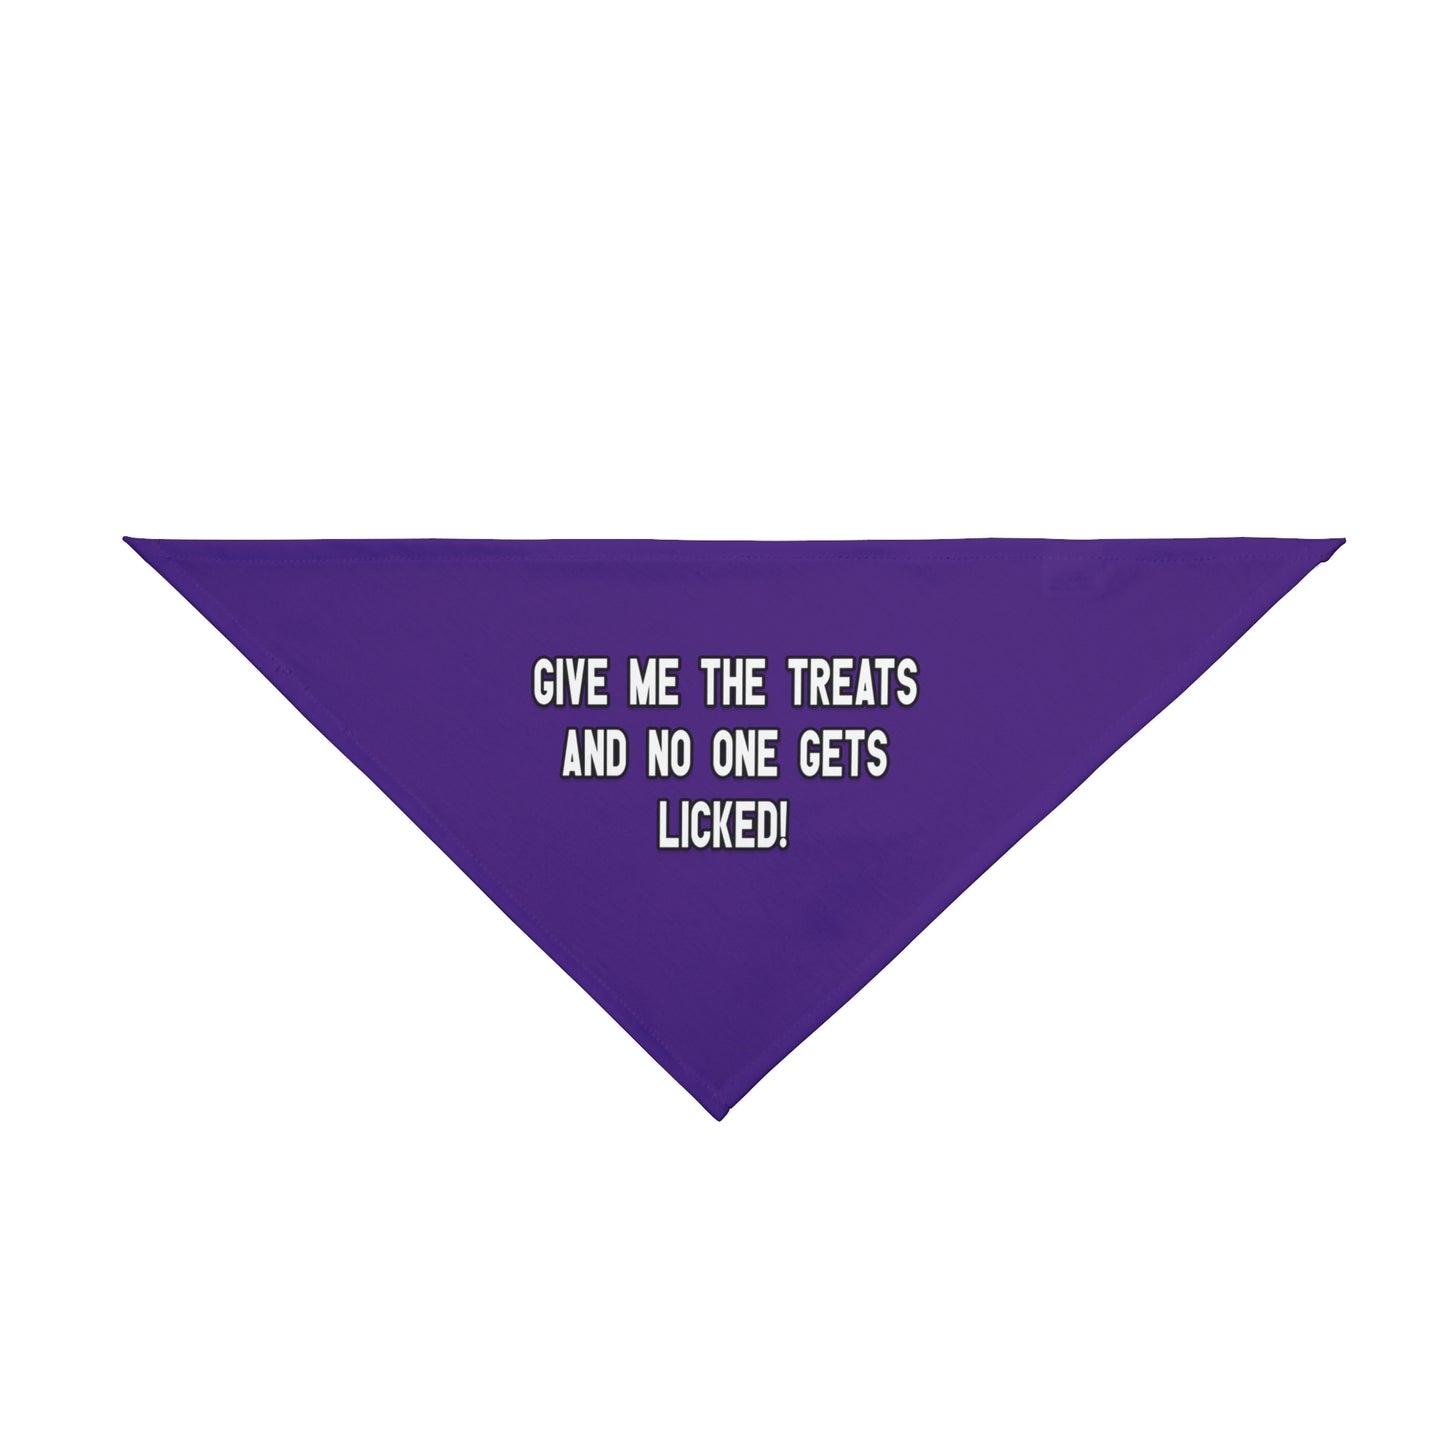 A bandana with the message: Give me the treats and no one gets licked! Bandana's Color is purple